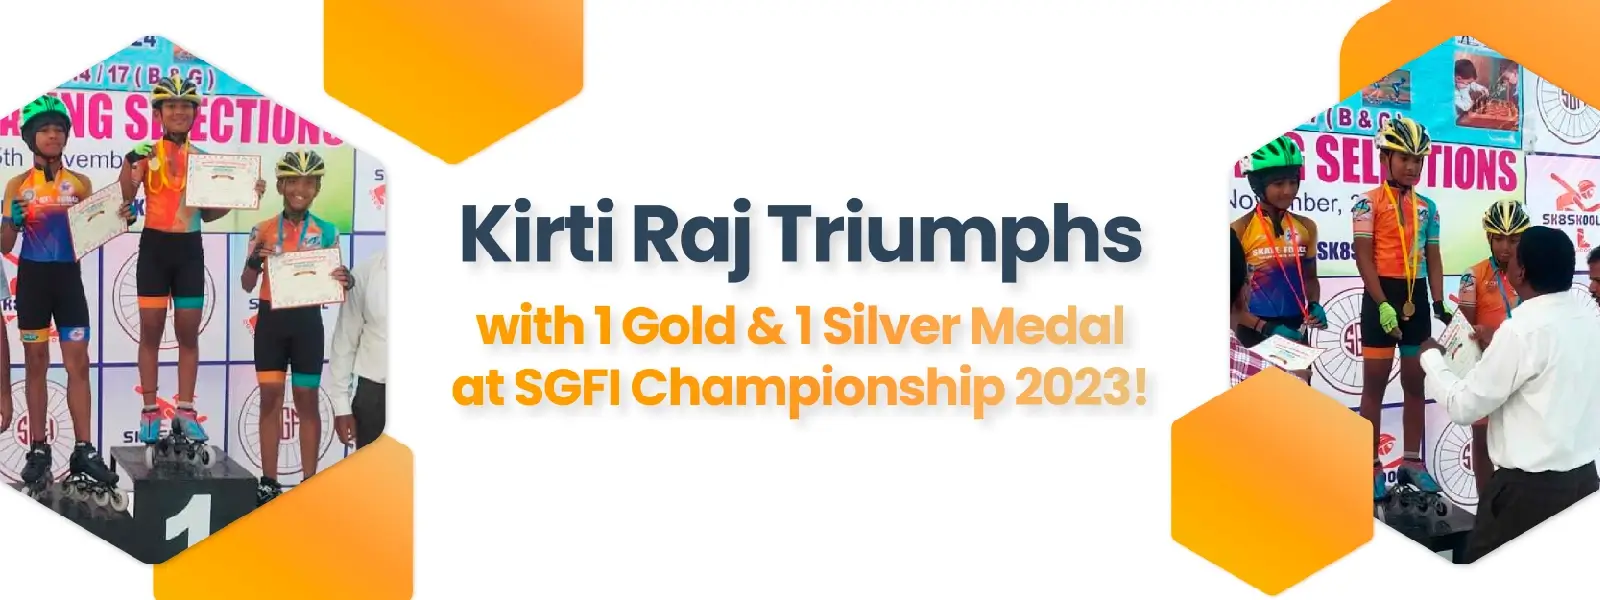 Kirti Raj Triumps with 1 Gold & 1 Silver Medal at SGFT Championship 2023  - CGR International School - Best School in Madhapur / Hyderabad